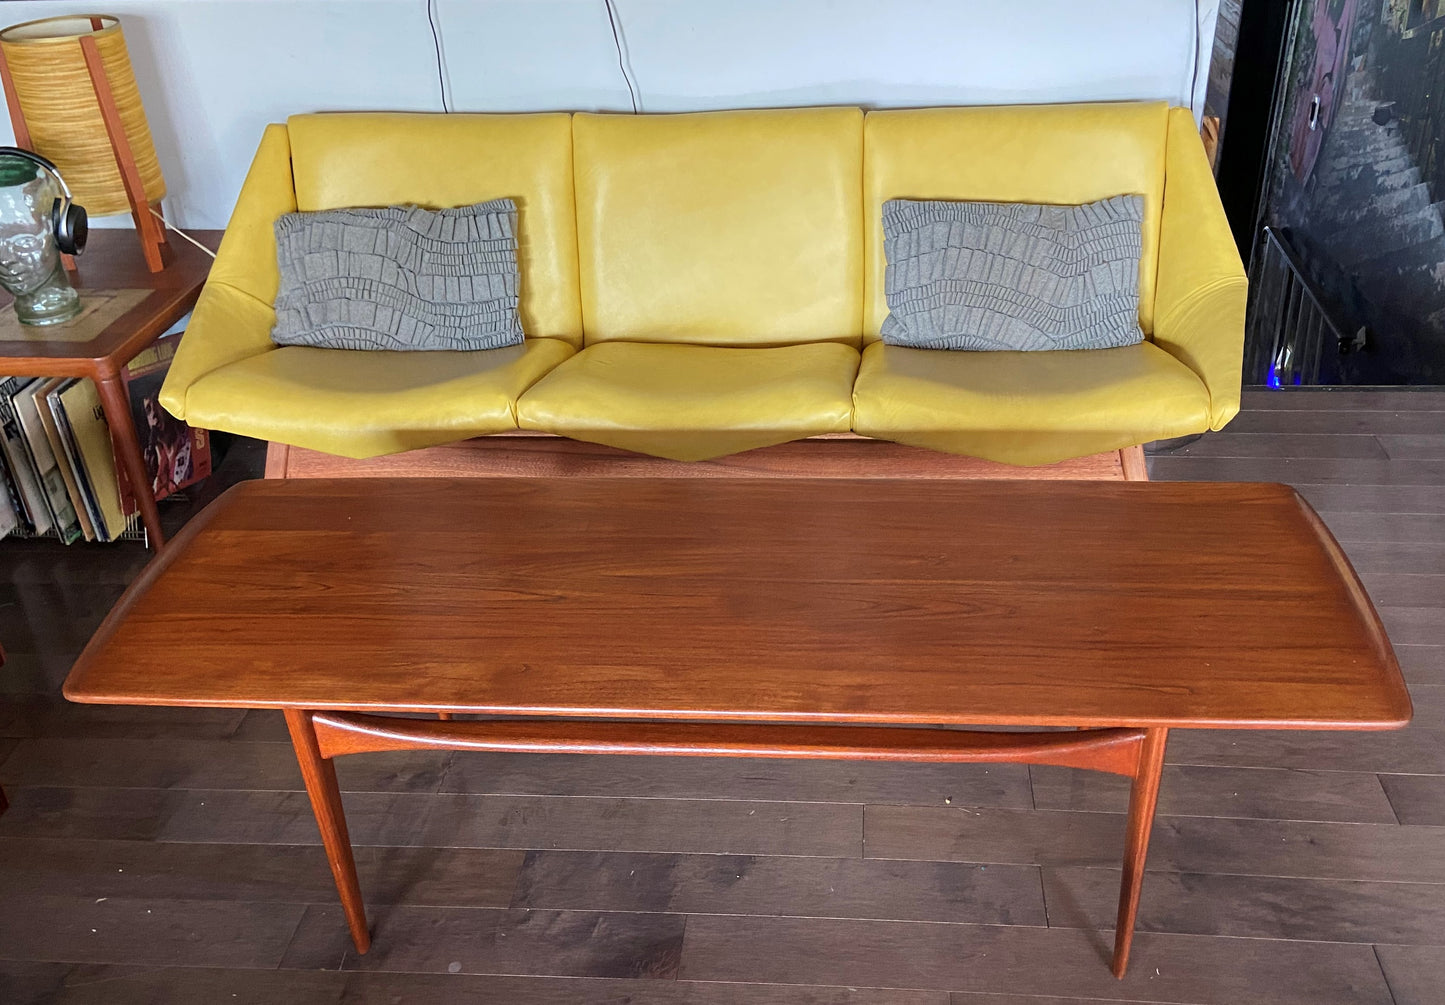 REFINISHED Mid Century Modern Solid Teak Coffee Table by France & Son, FD503, PERFECT